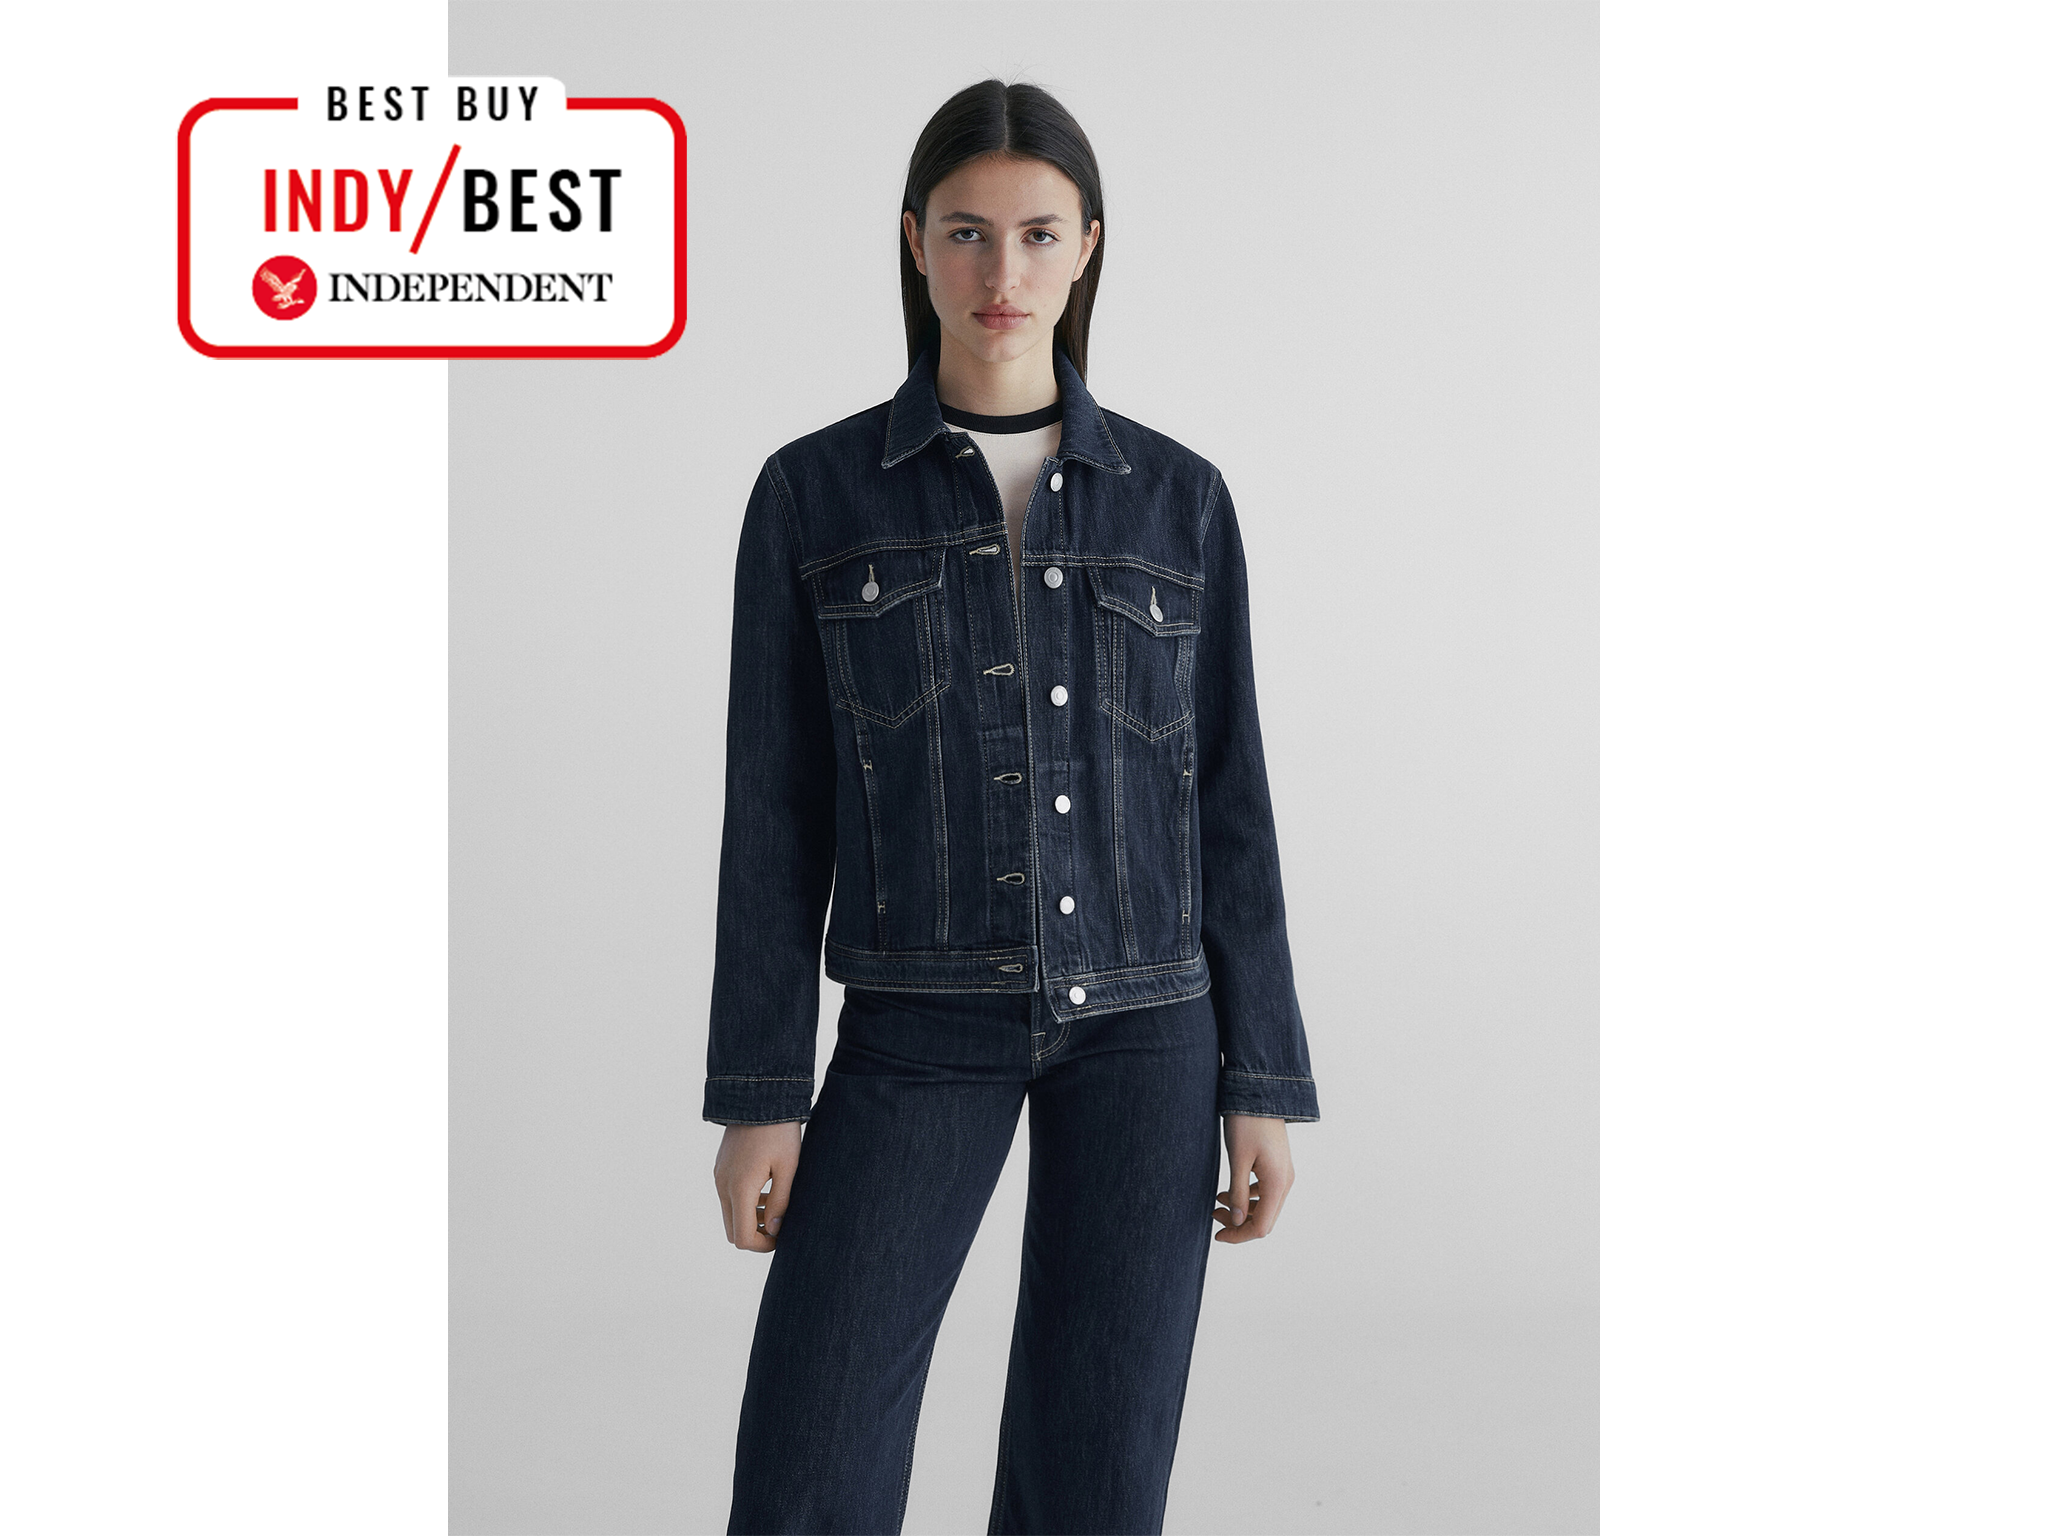 The Best Denim: Guide to Women's Jeans, Denim Jackets & More